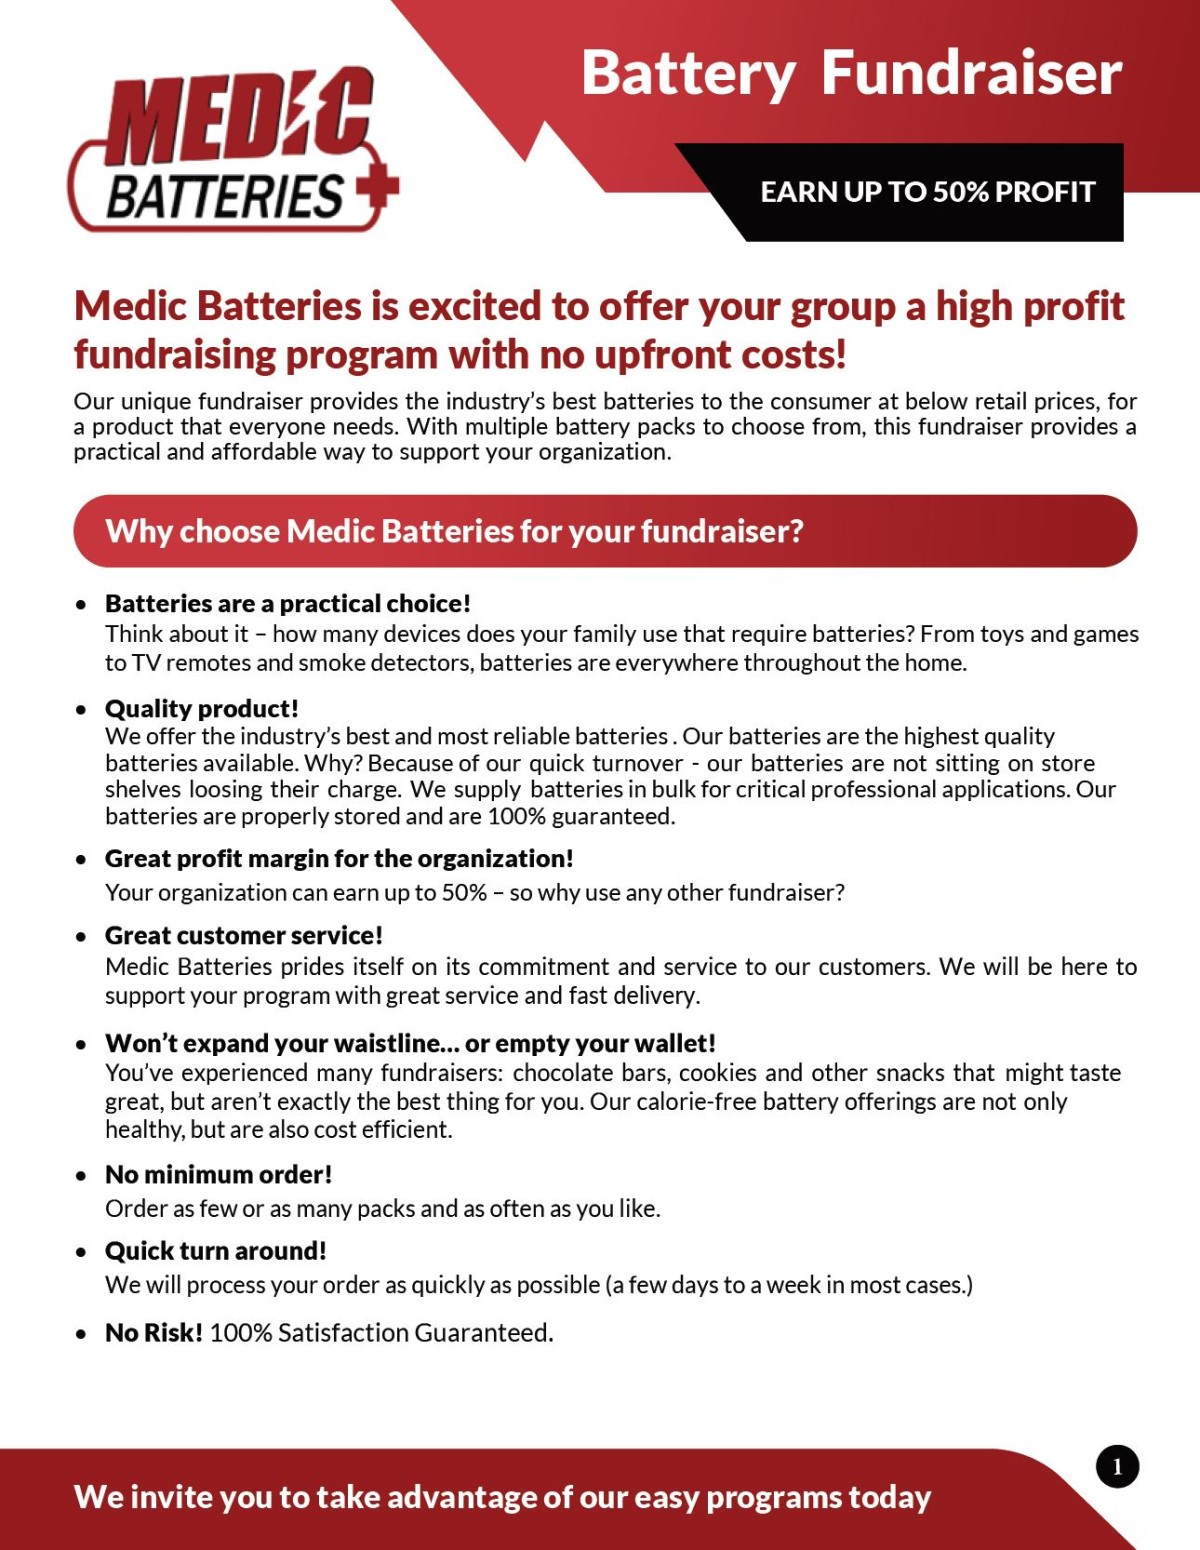 Medic Batteries Fundraiser Page 1